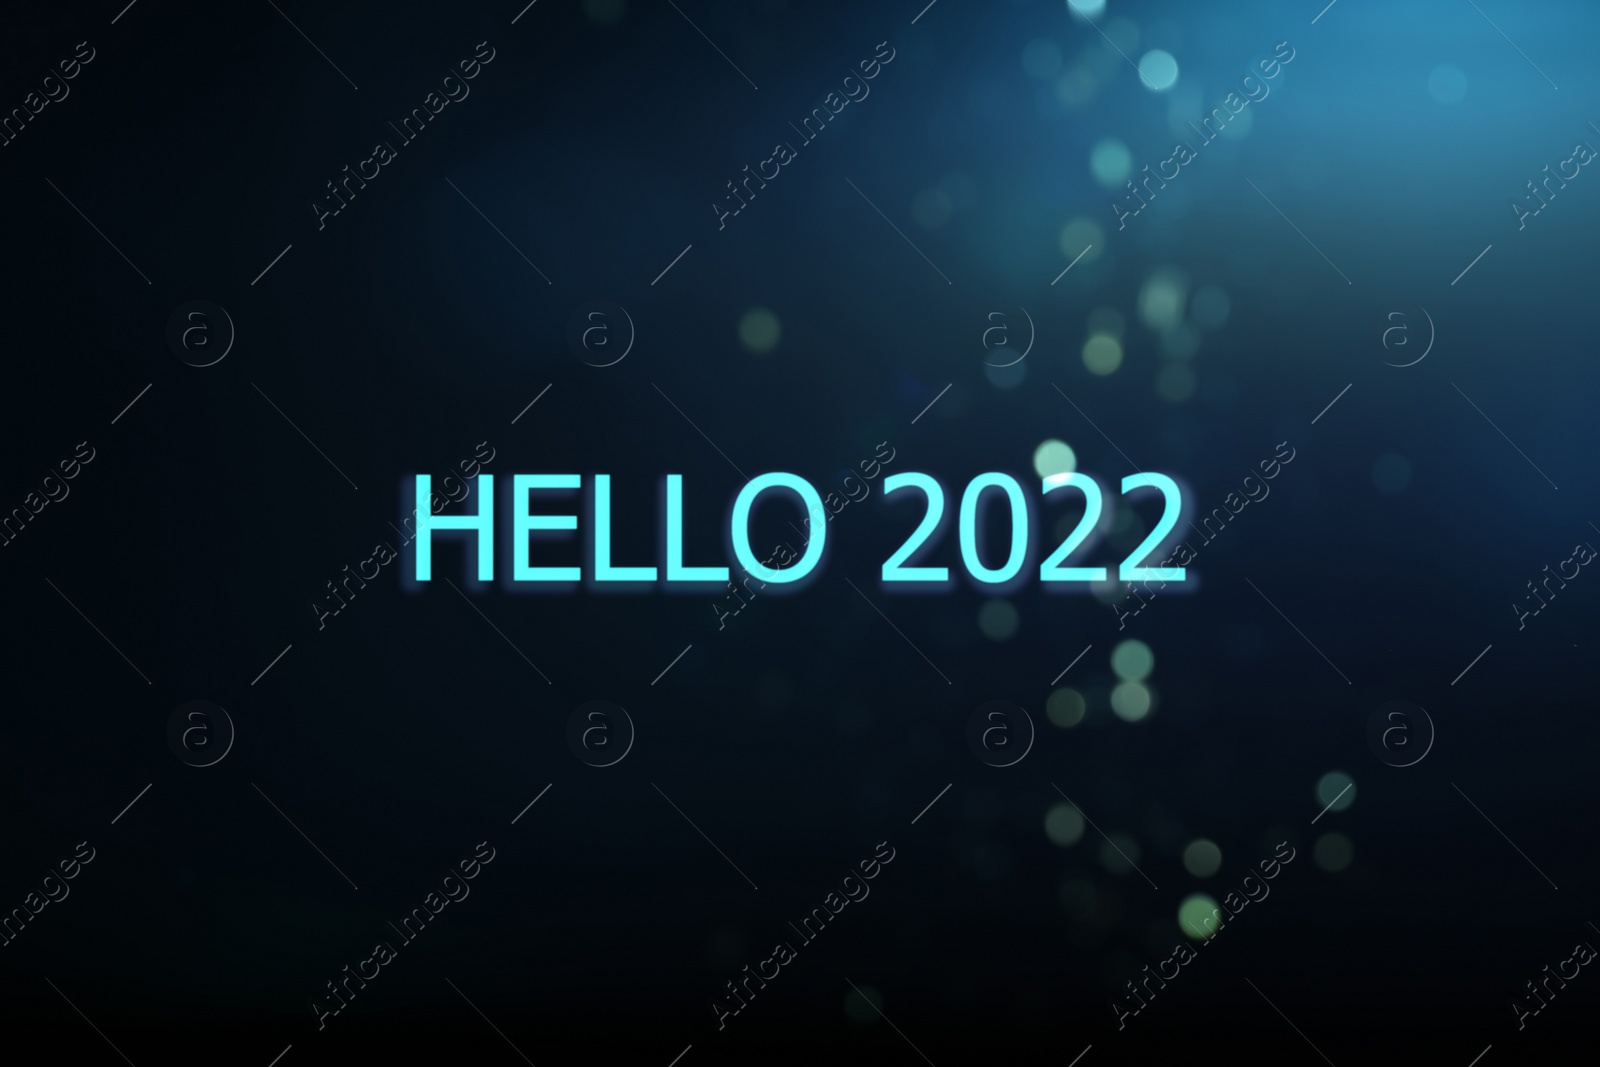 Image of Text Hello 2022 on dark background with blurred festive lights, bokeh effect